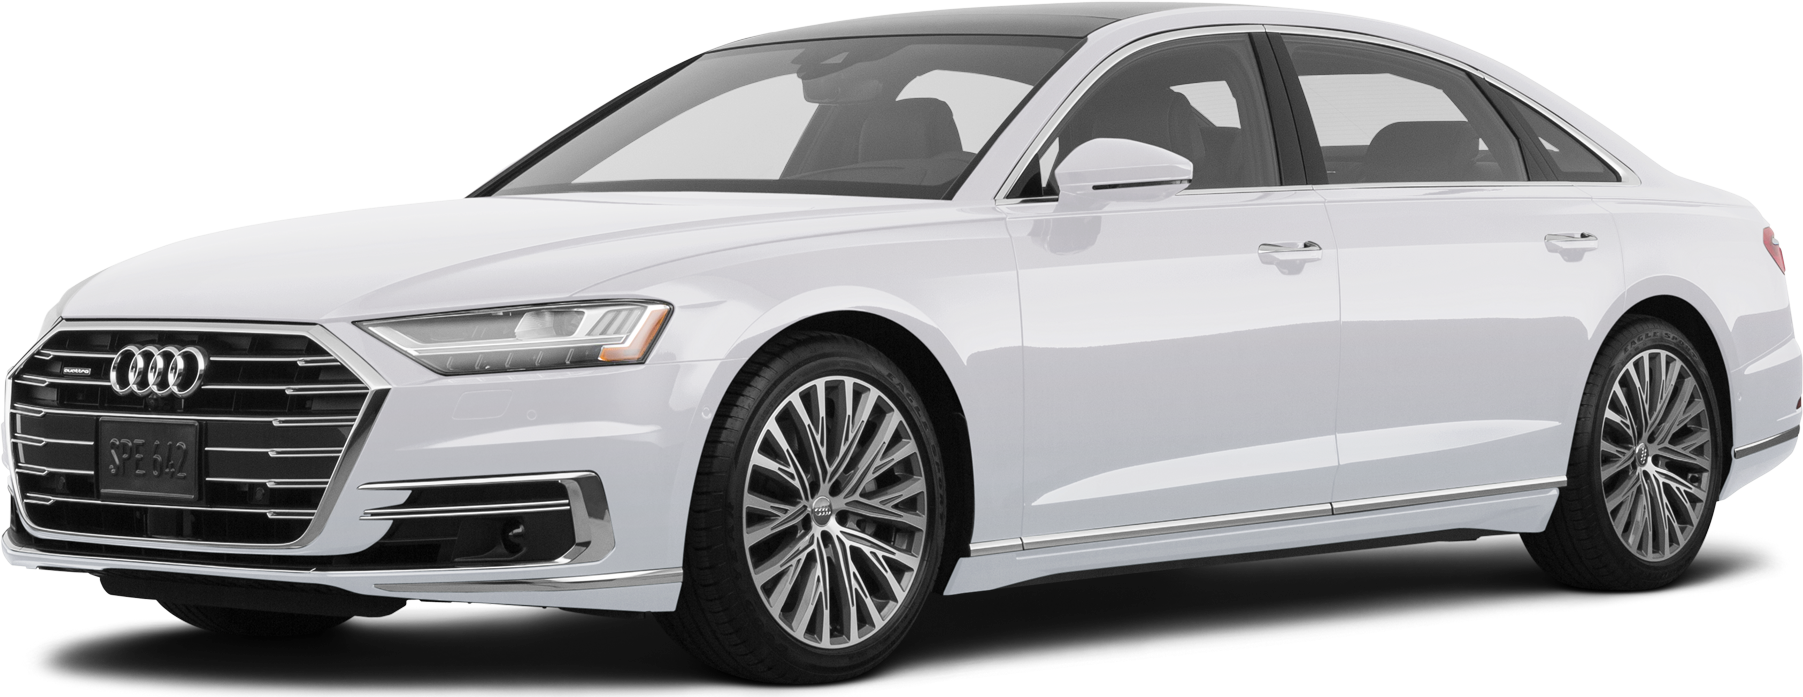 2020 Audi A8 Price, Value, Ratings & Reviews